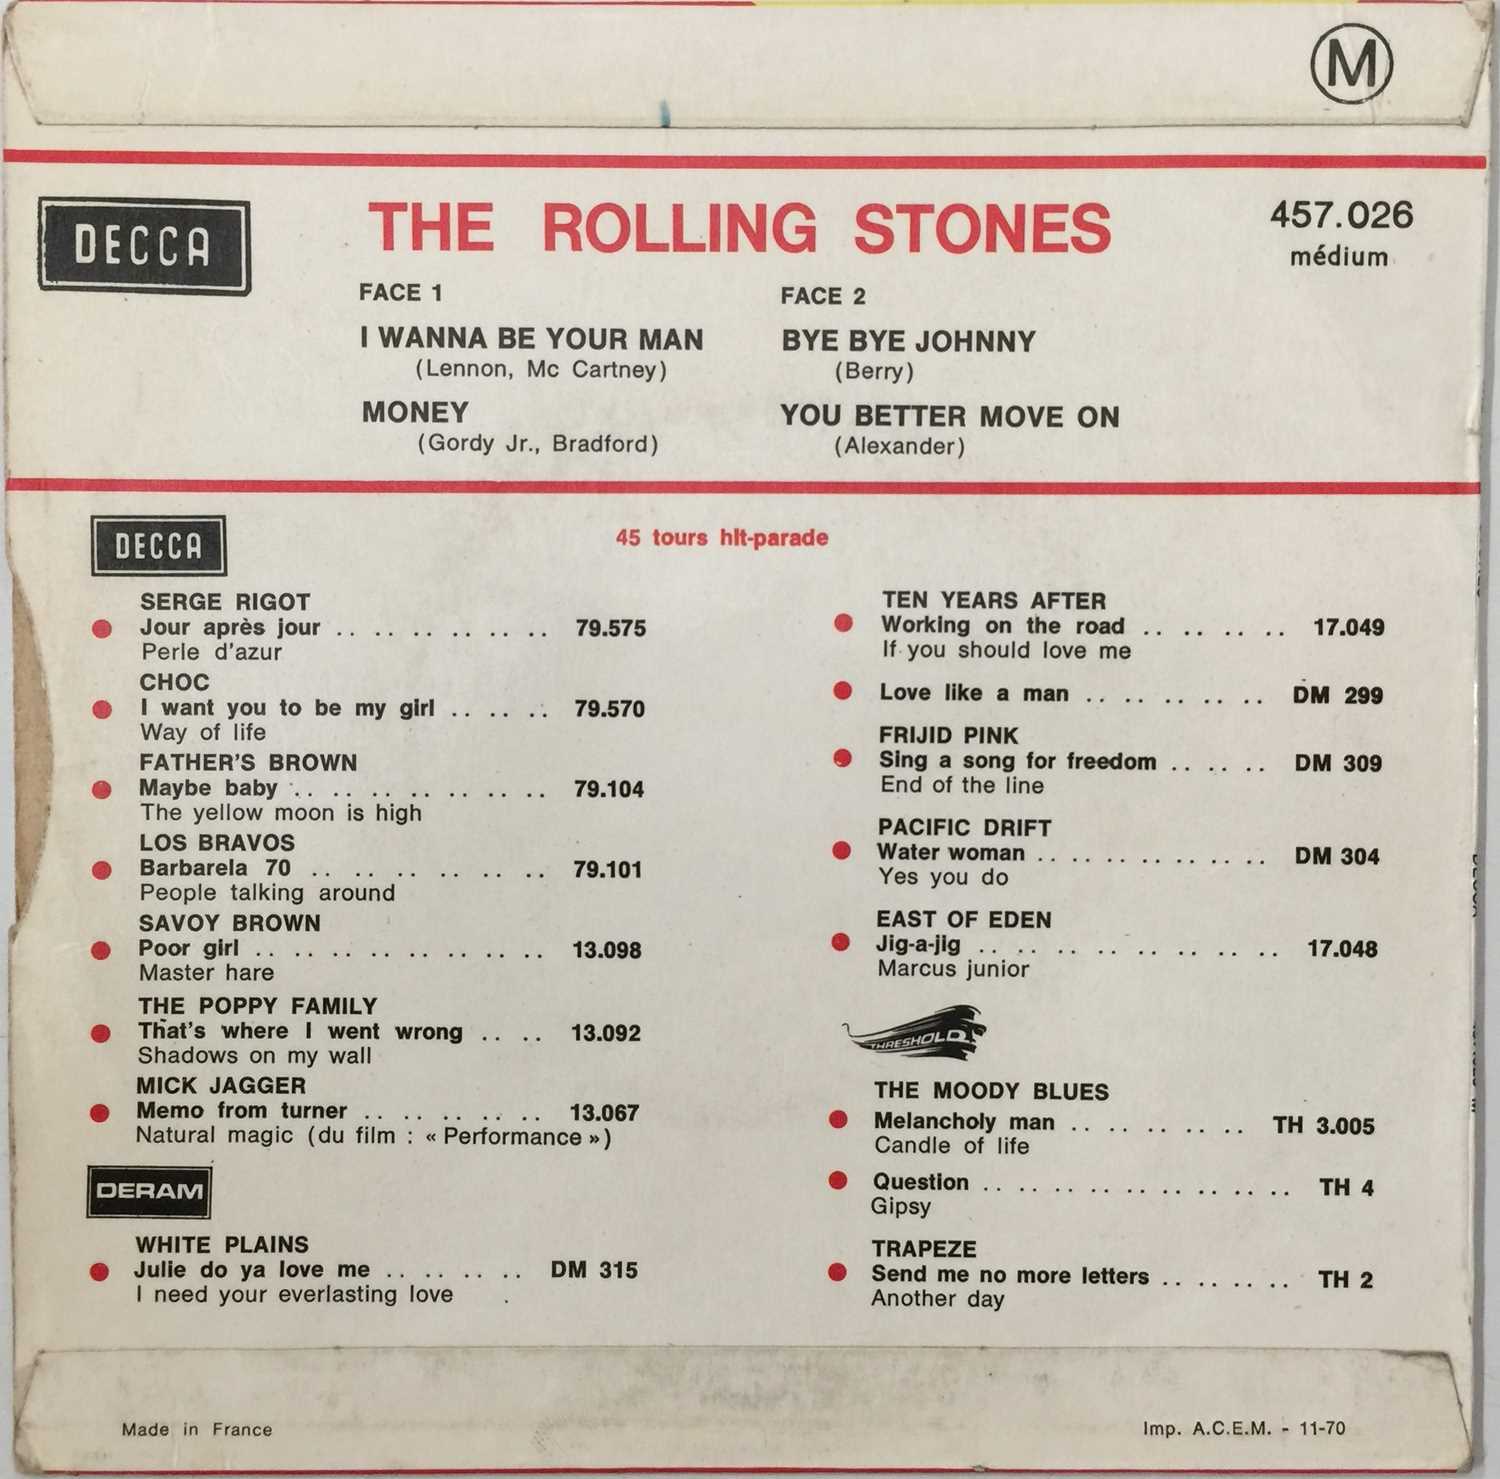 THE ROLLING STONES - I WANNA BE YOUR MAN 7" (457.026 M) - Image 3 of 5